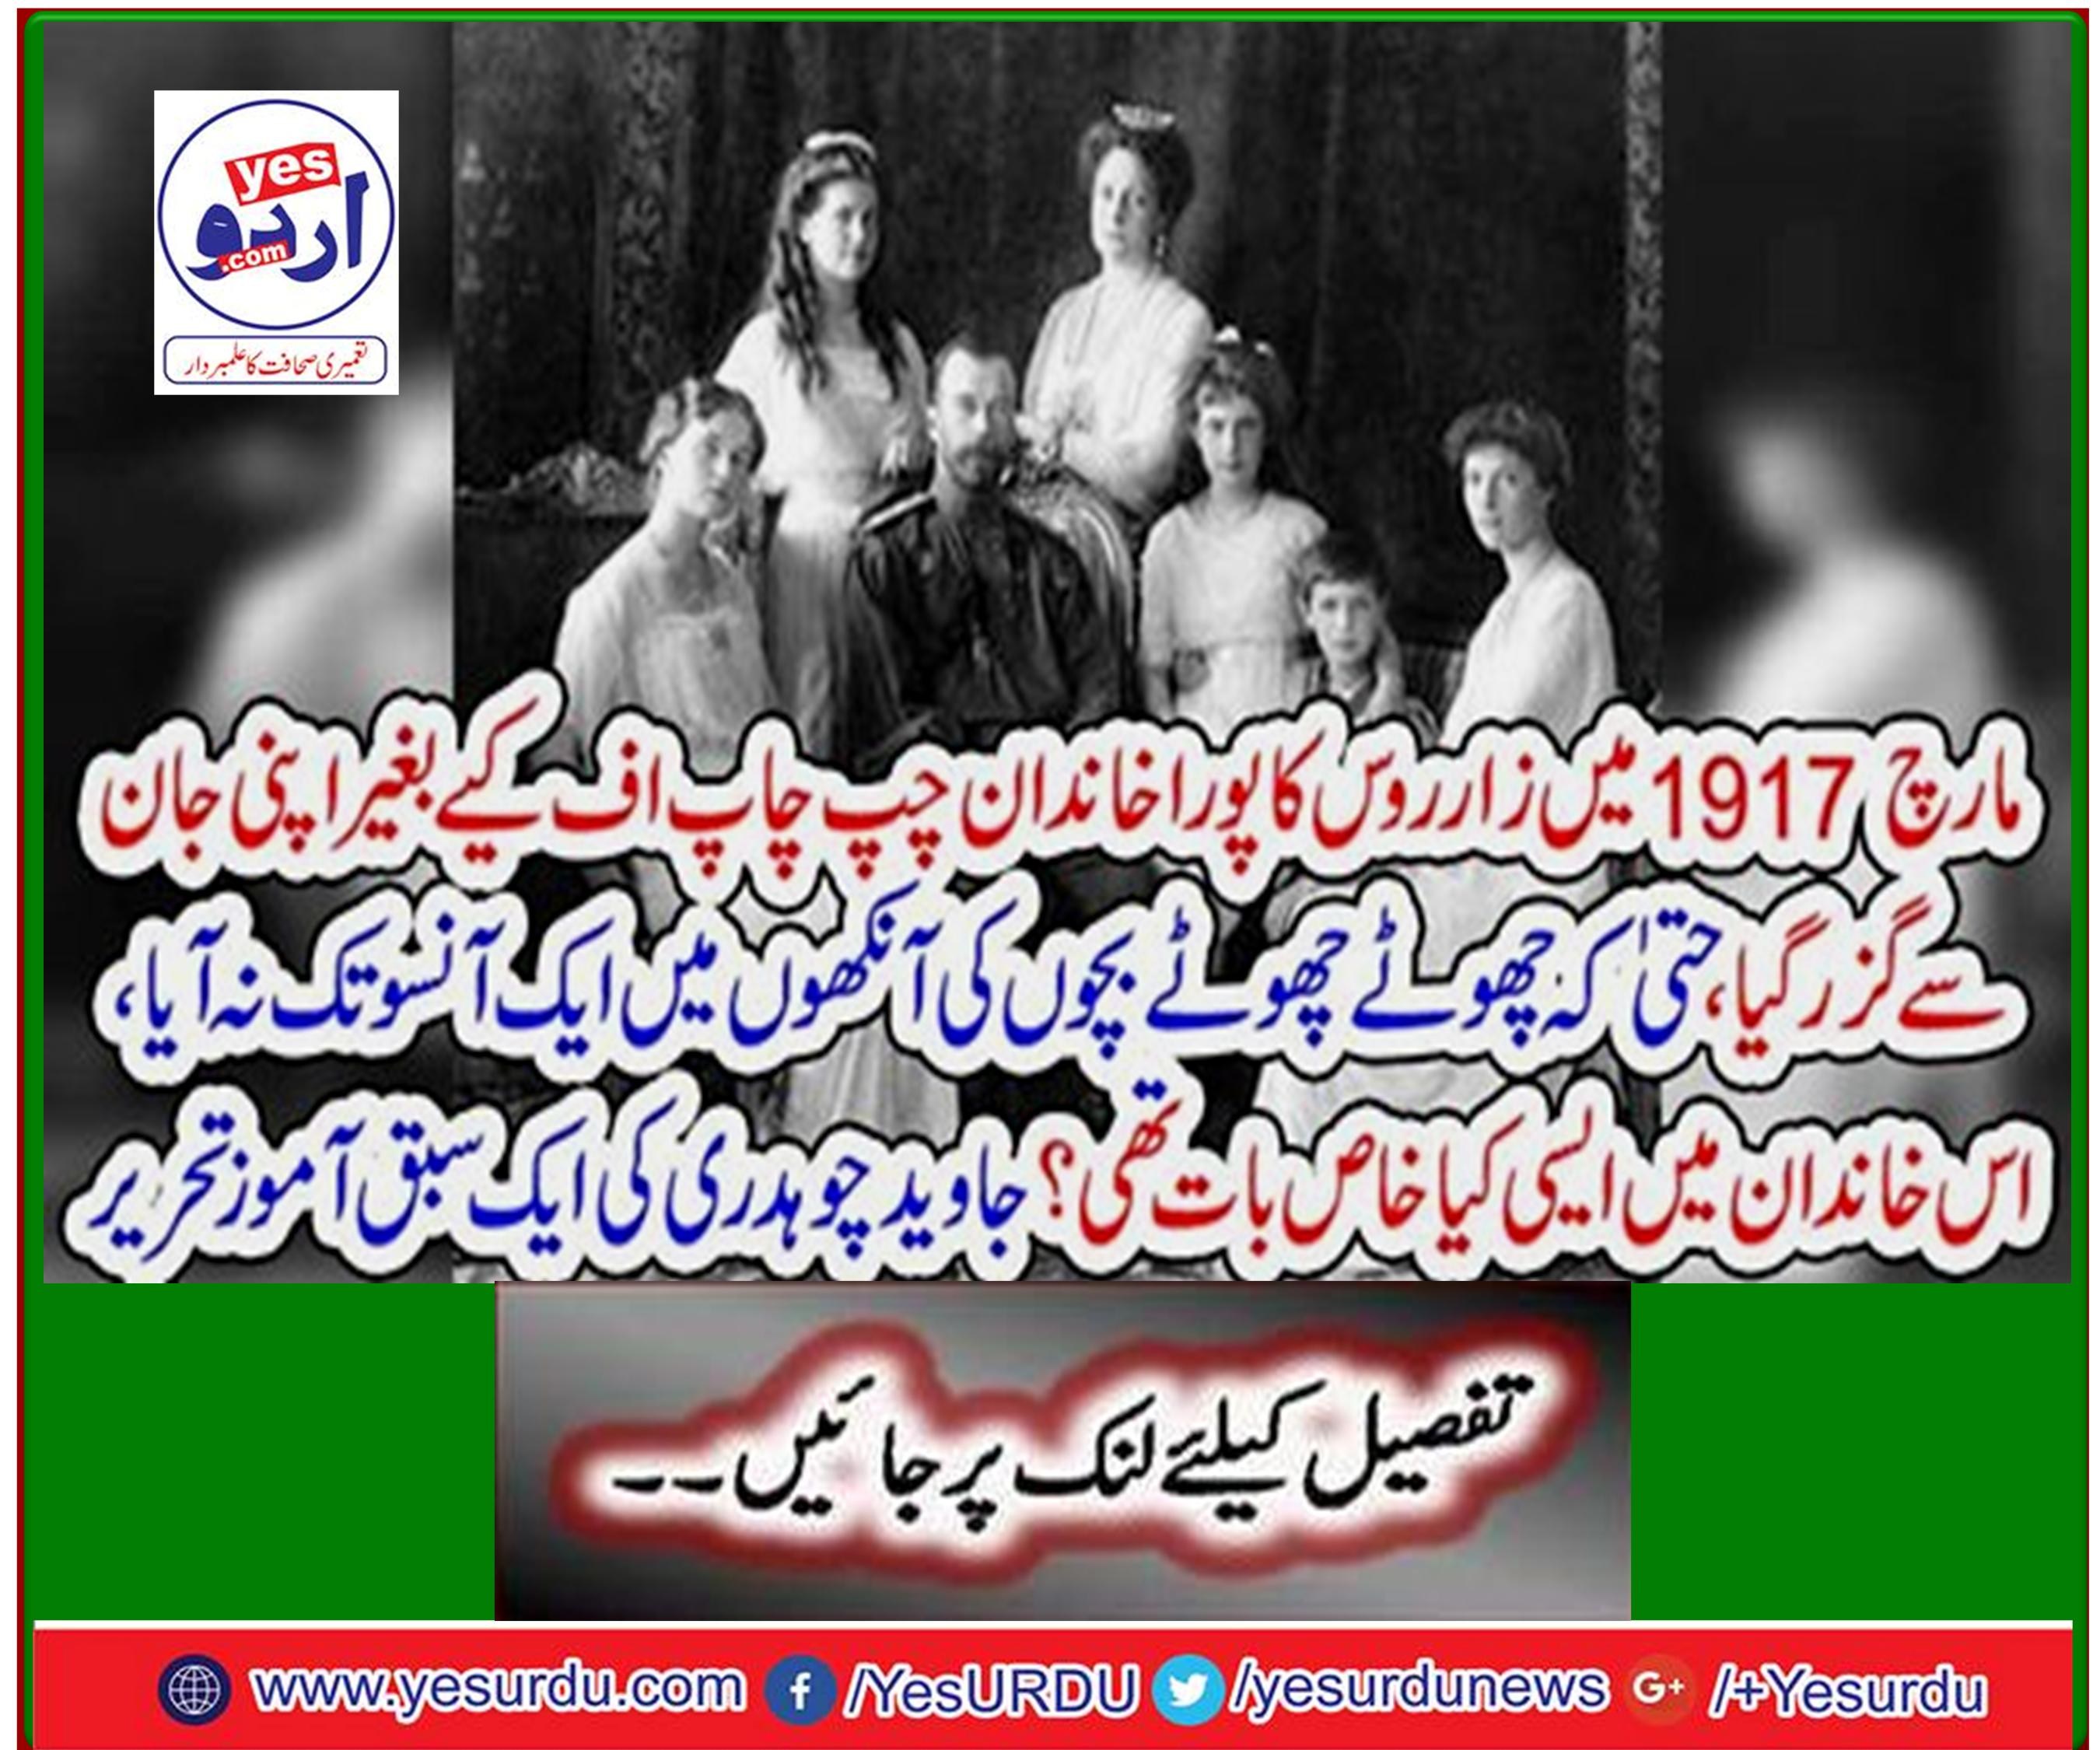 In March 1917, the whole family of the Czar Russia passed away without silence, even in the eyes of little children, what was so special about this family? Writing a tutorial by Javed Chaudhry